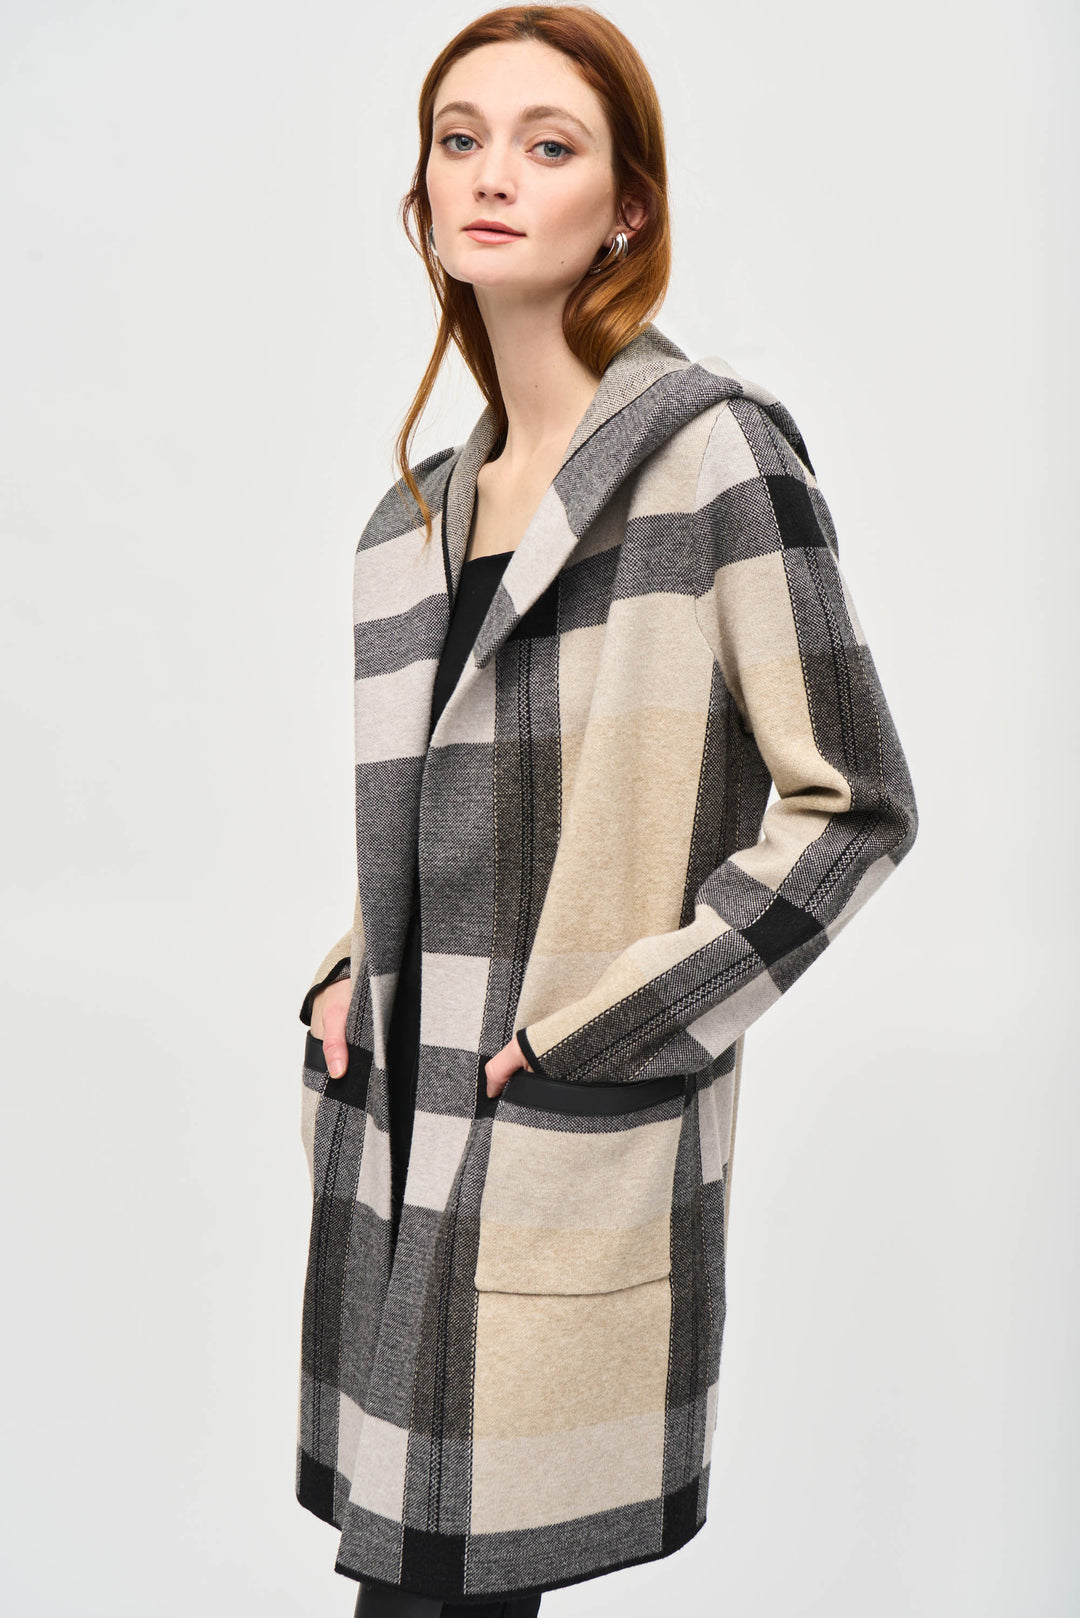 Fall 2024 Crafted from the softest fabric, this open-style long cardigan offers a chic plaid design, alongside two convenient side pockets.